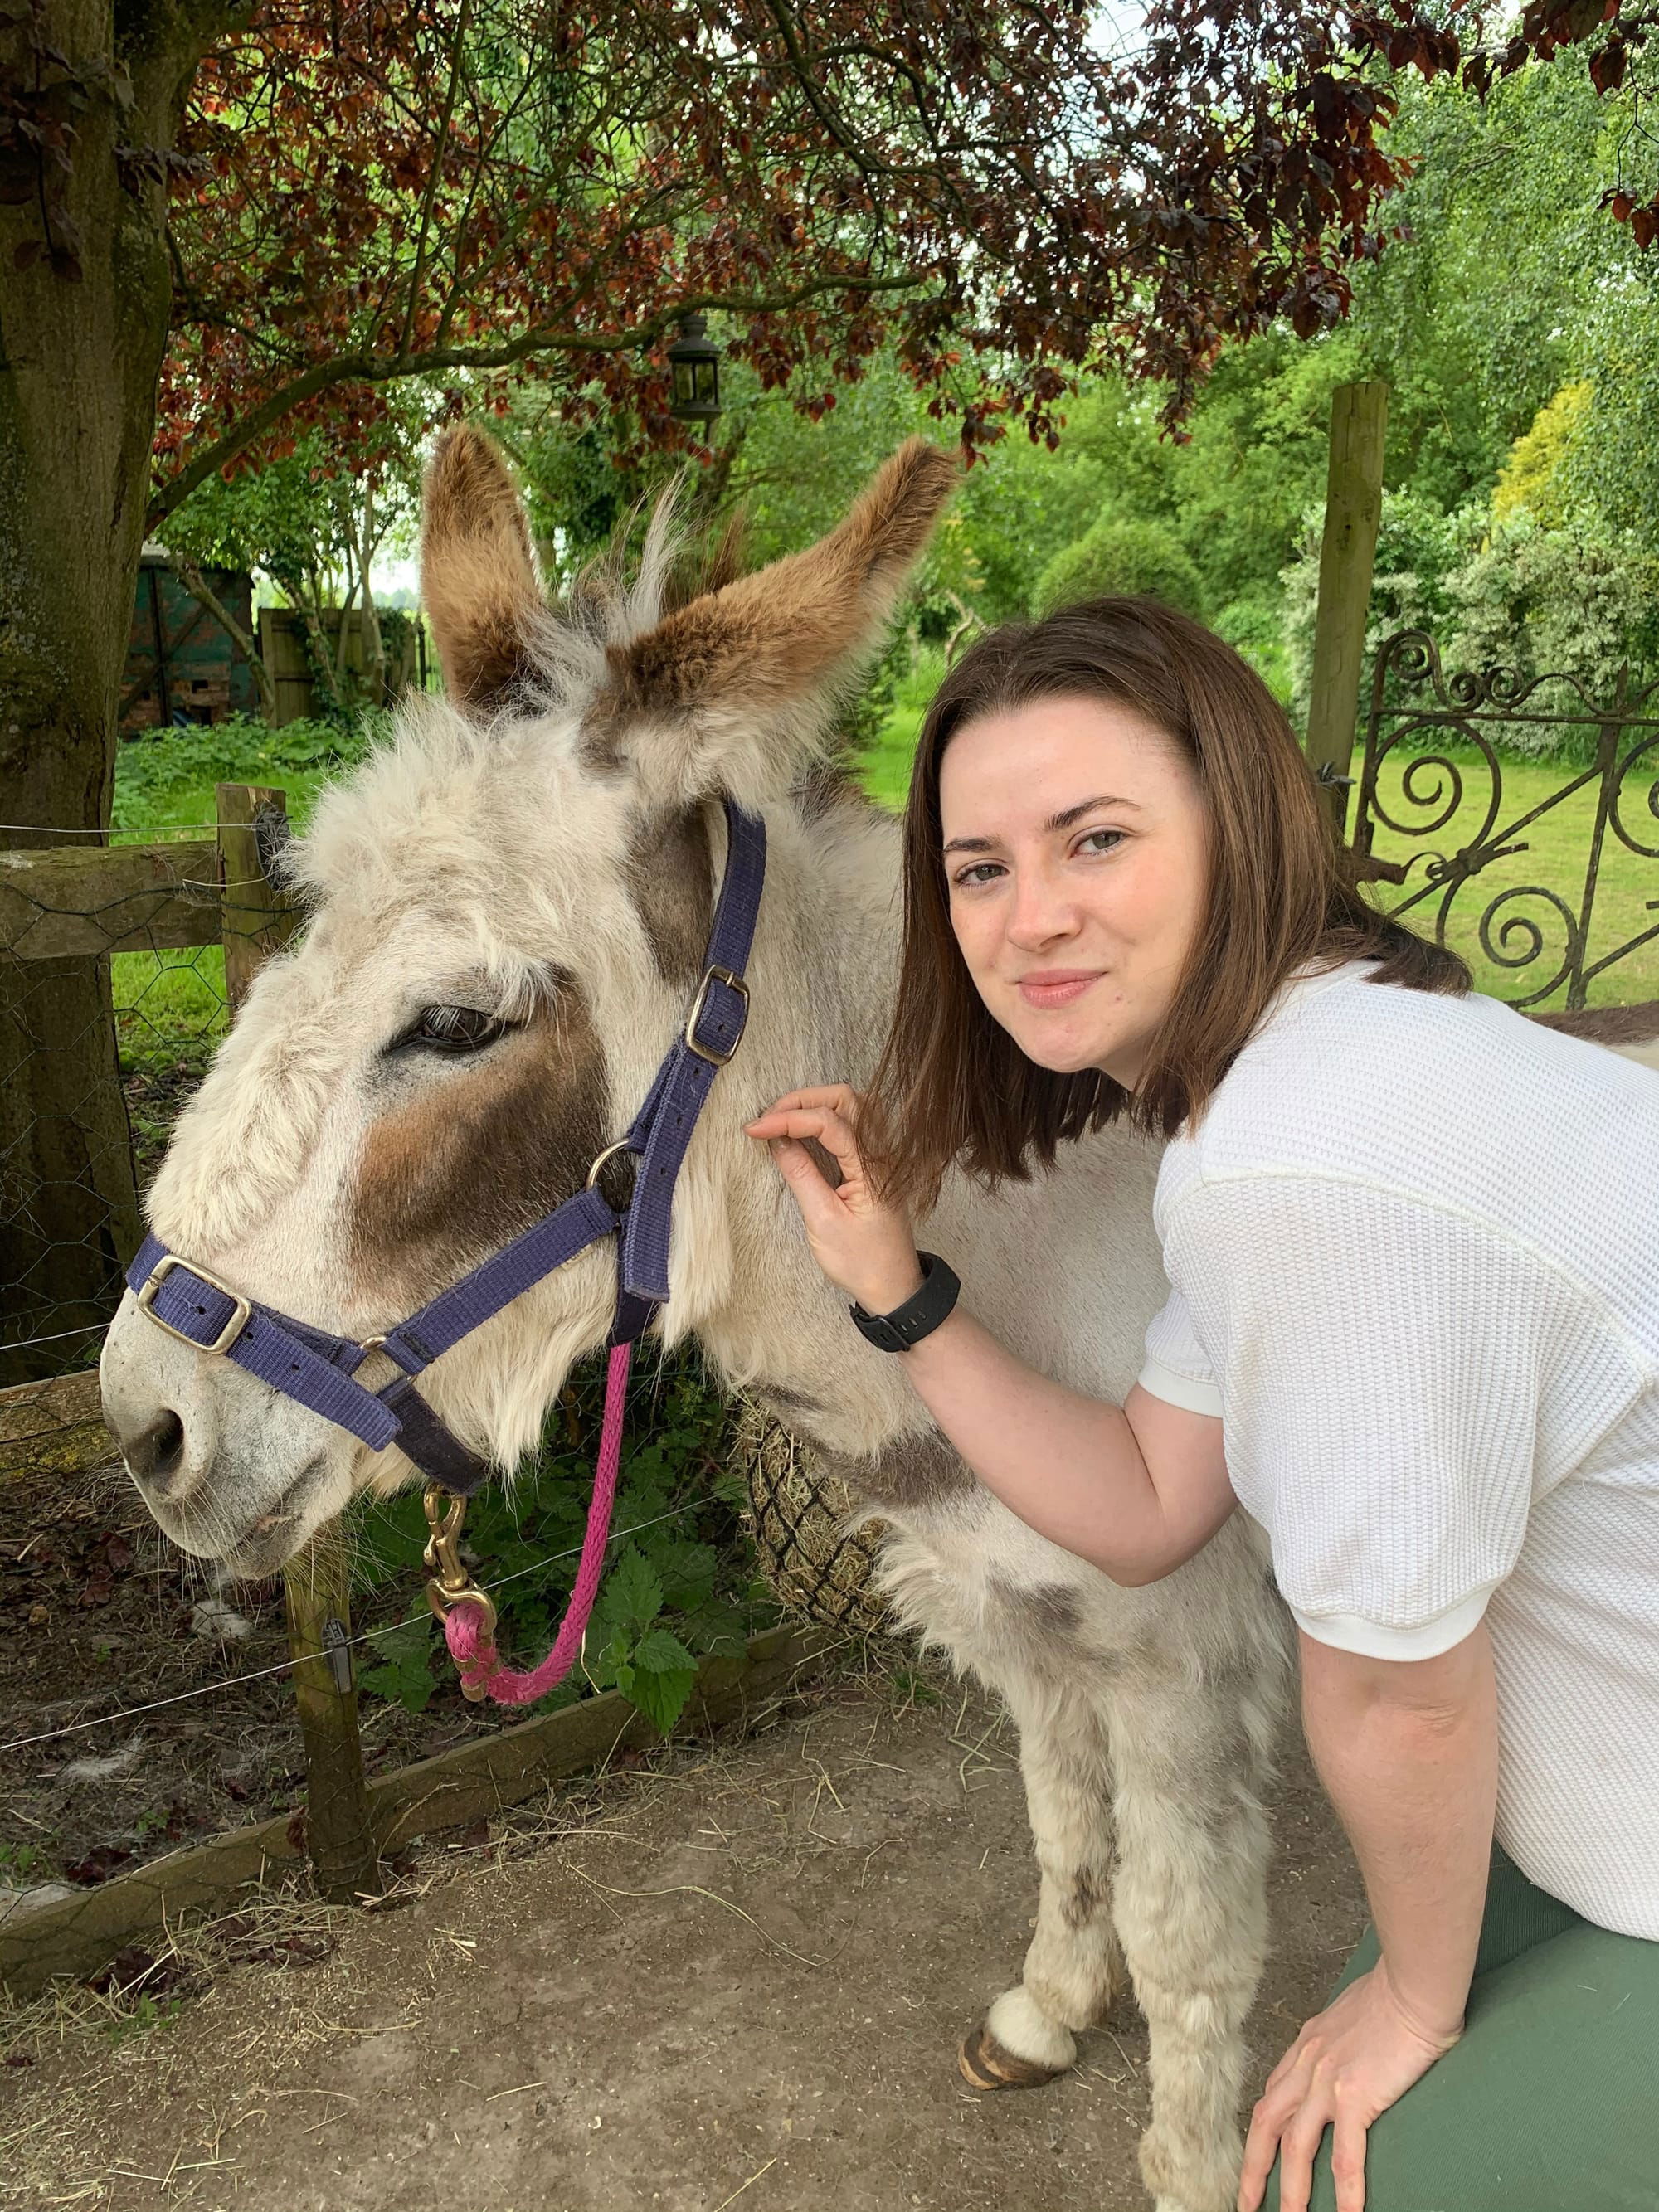 Our donkeys are very friendly!